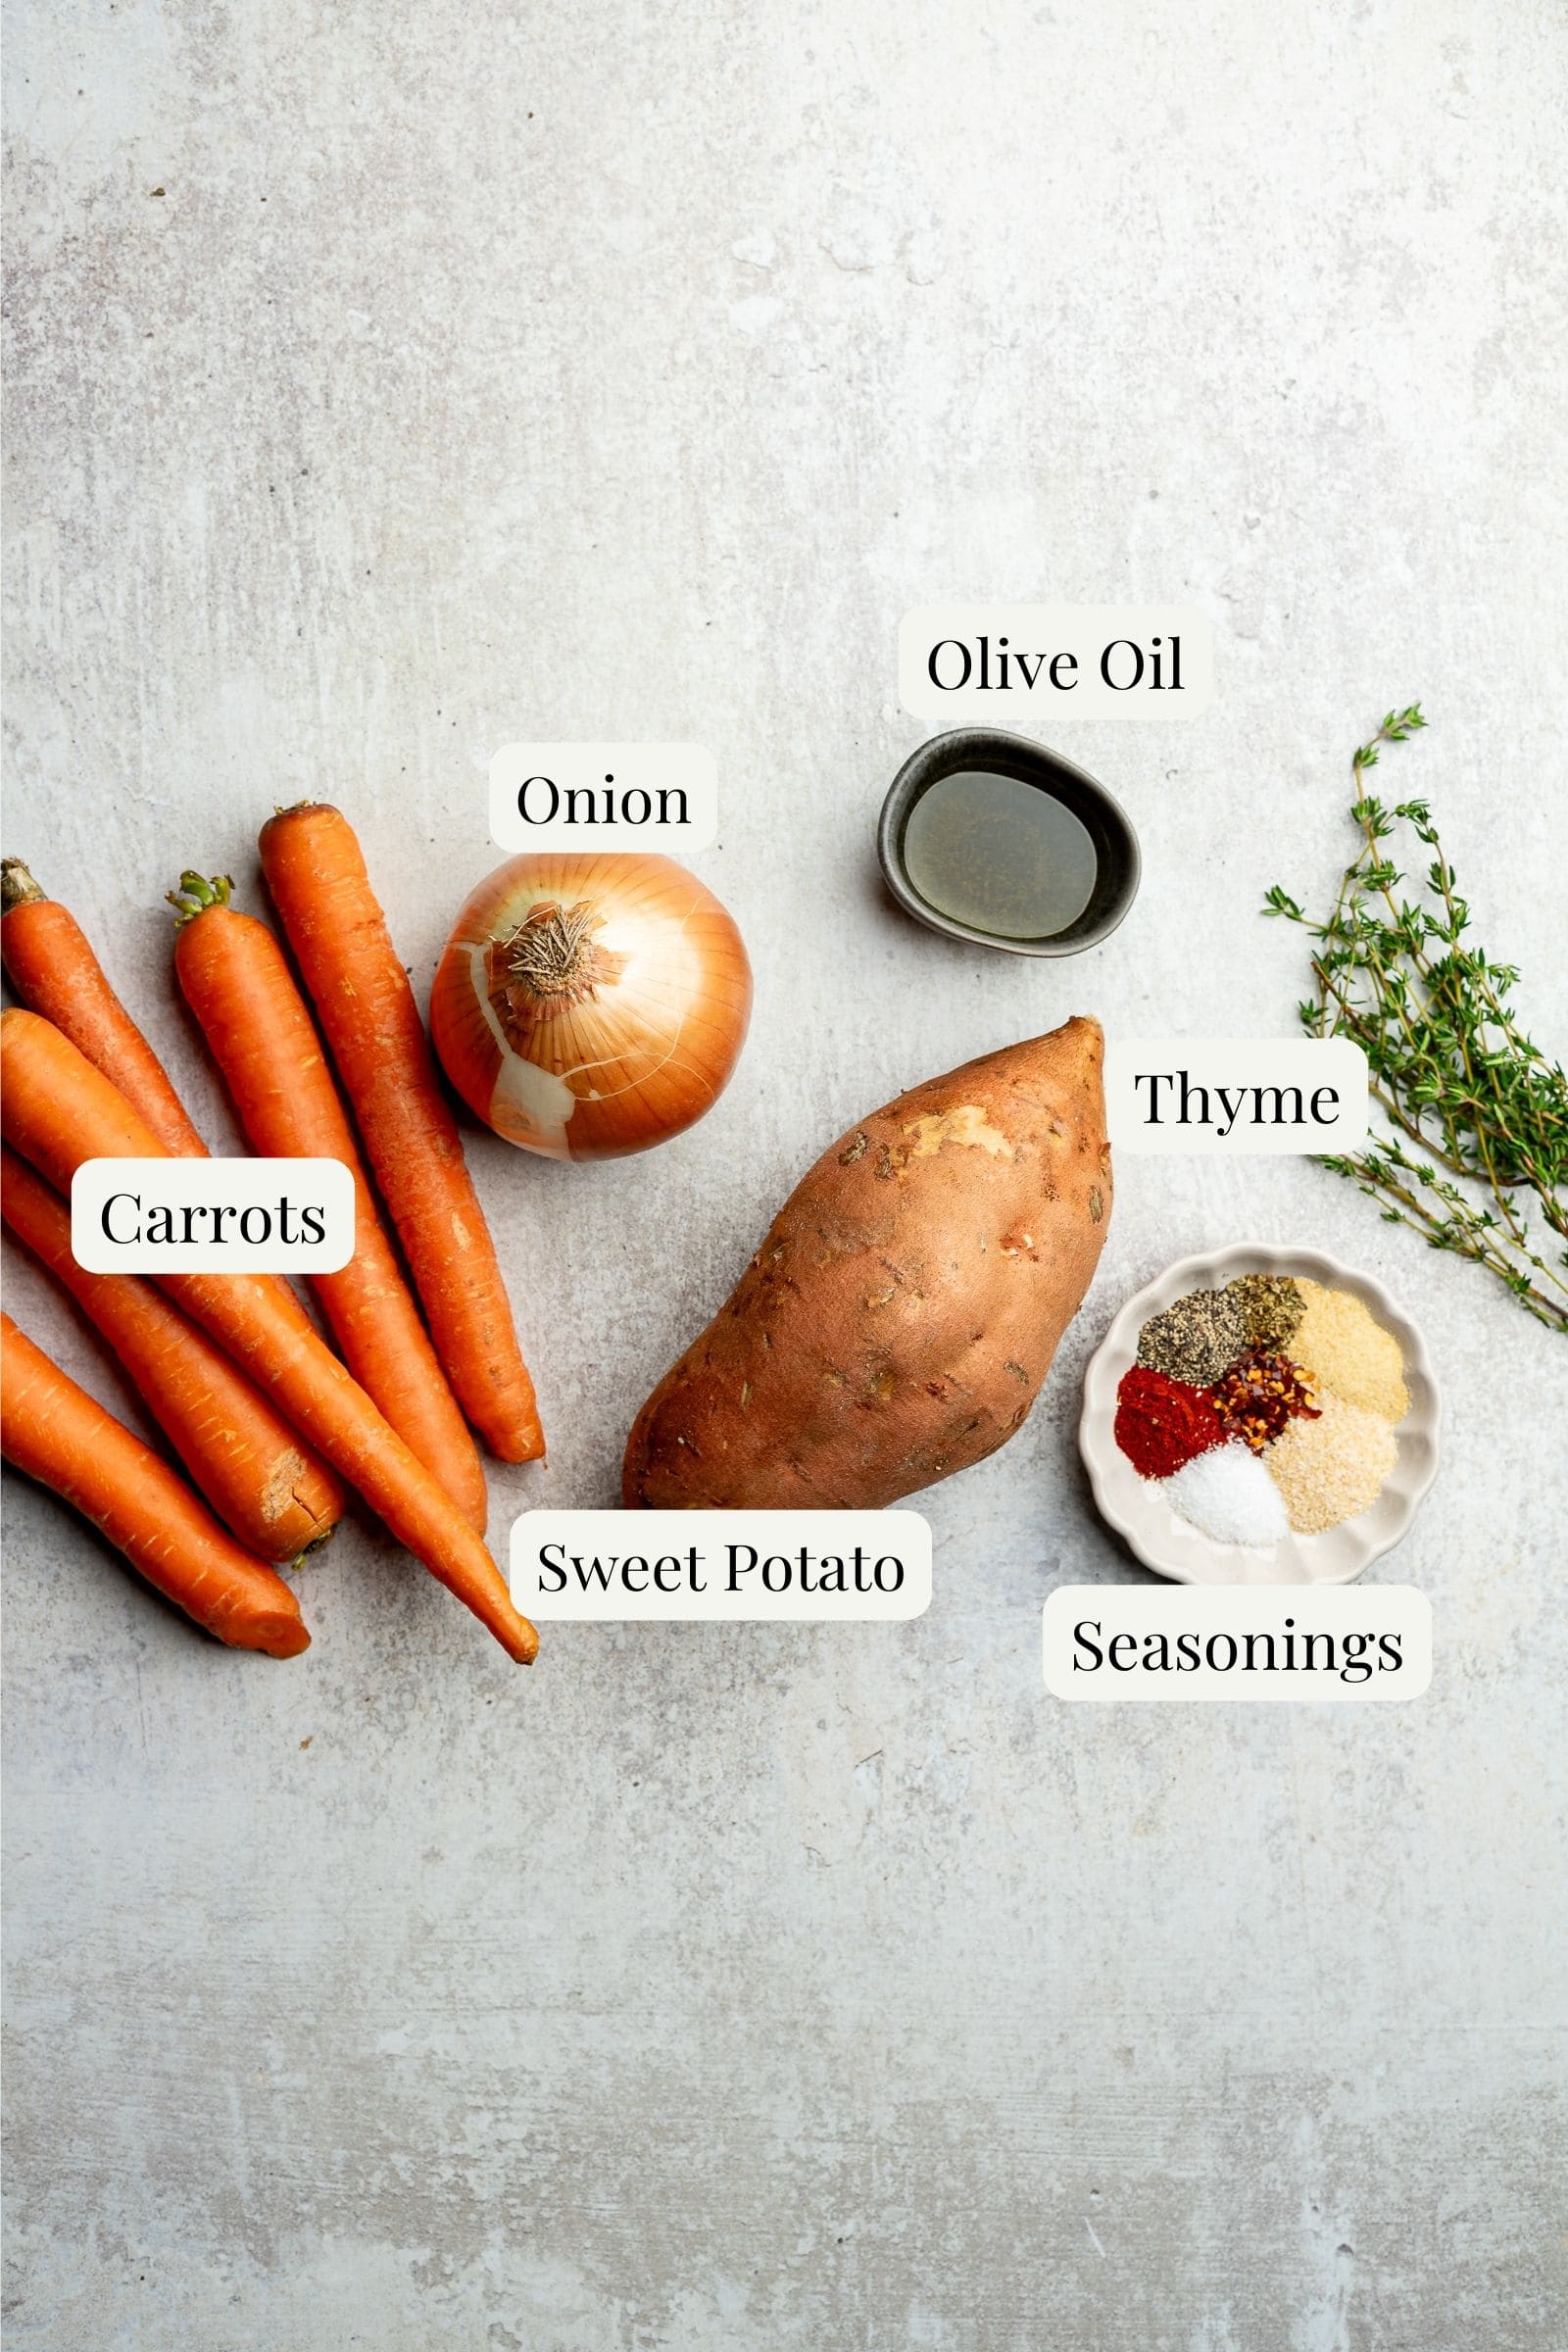 Labeled ingredients for roasted sweet potatoes and carrots.